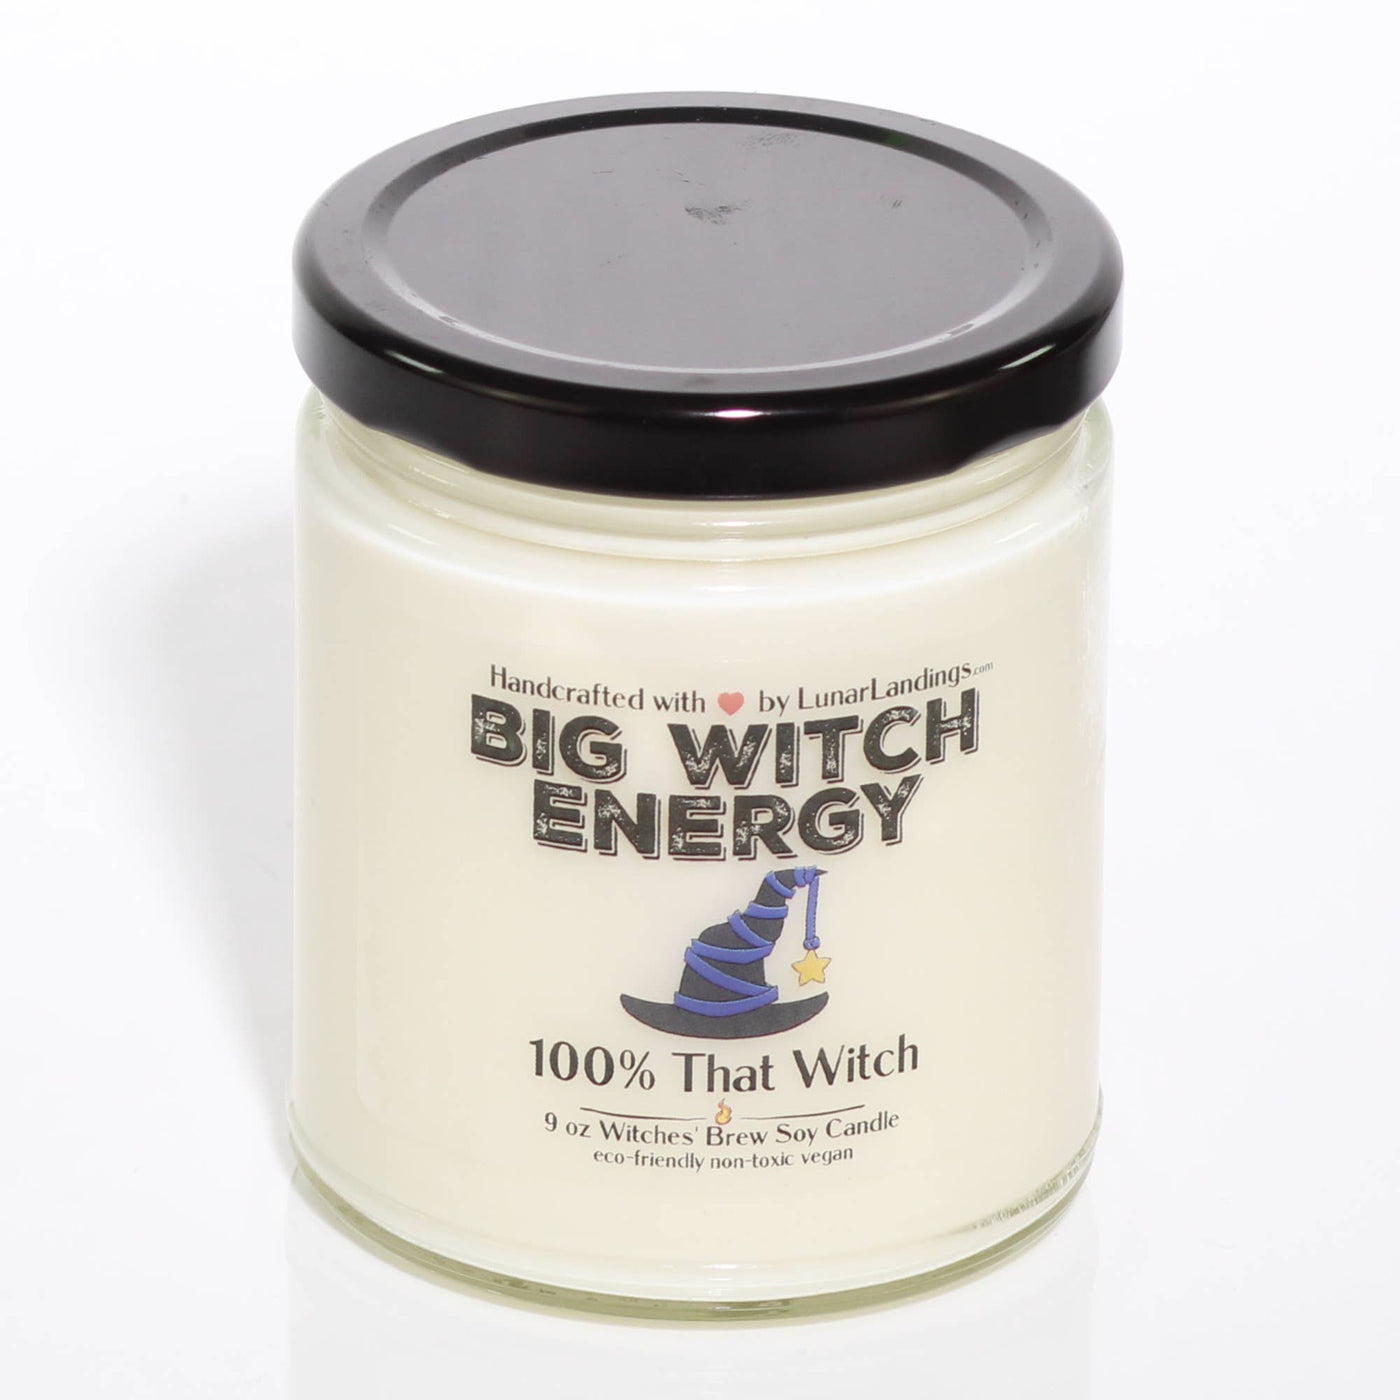 Big Witch Energy Soy Candle